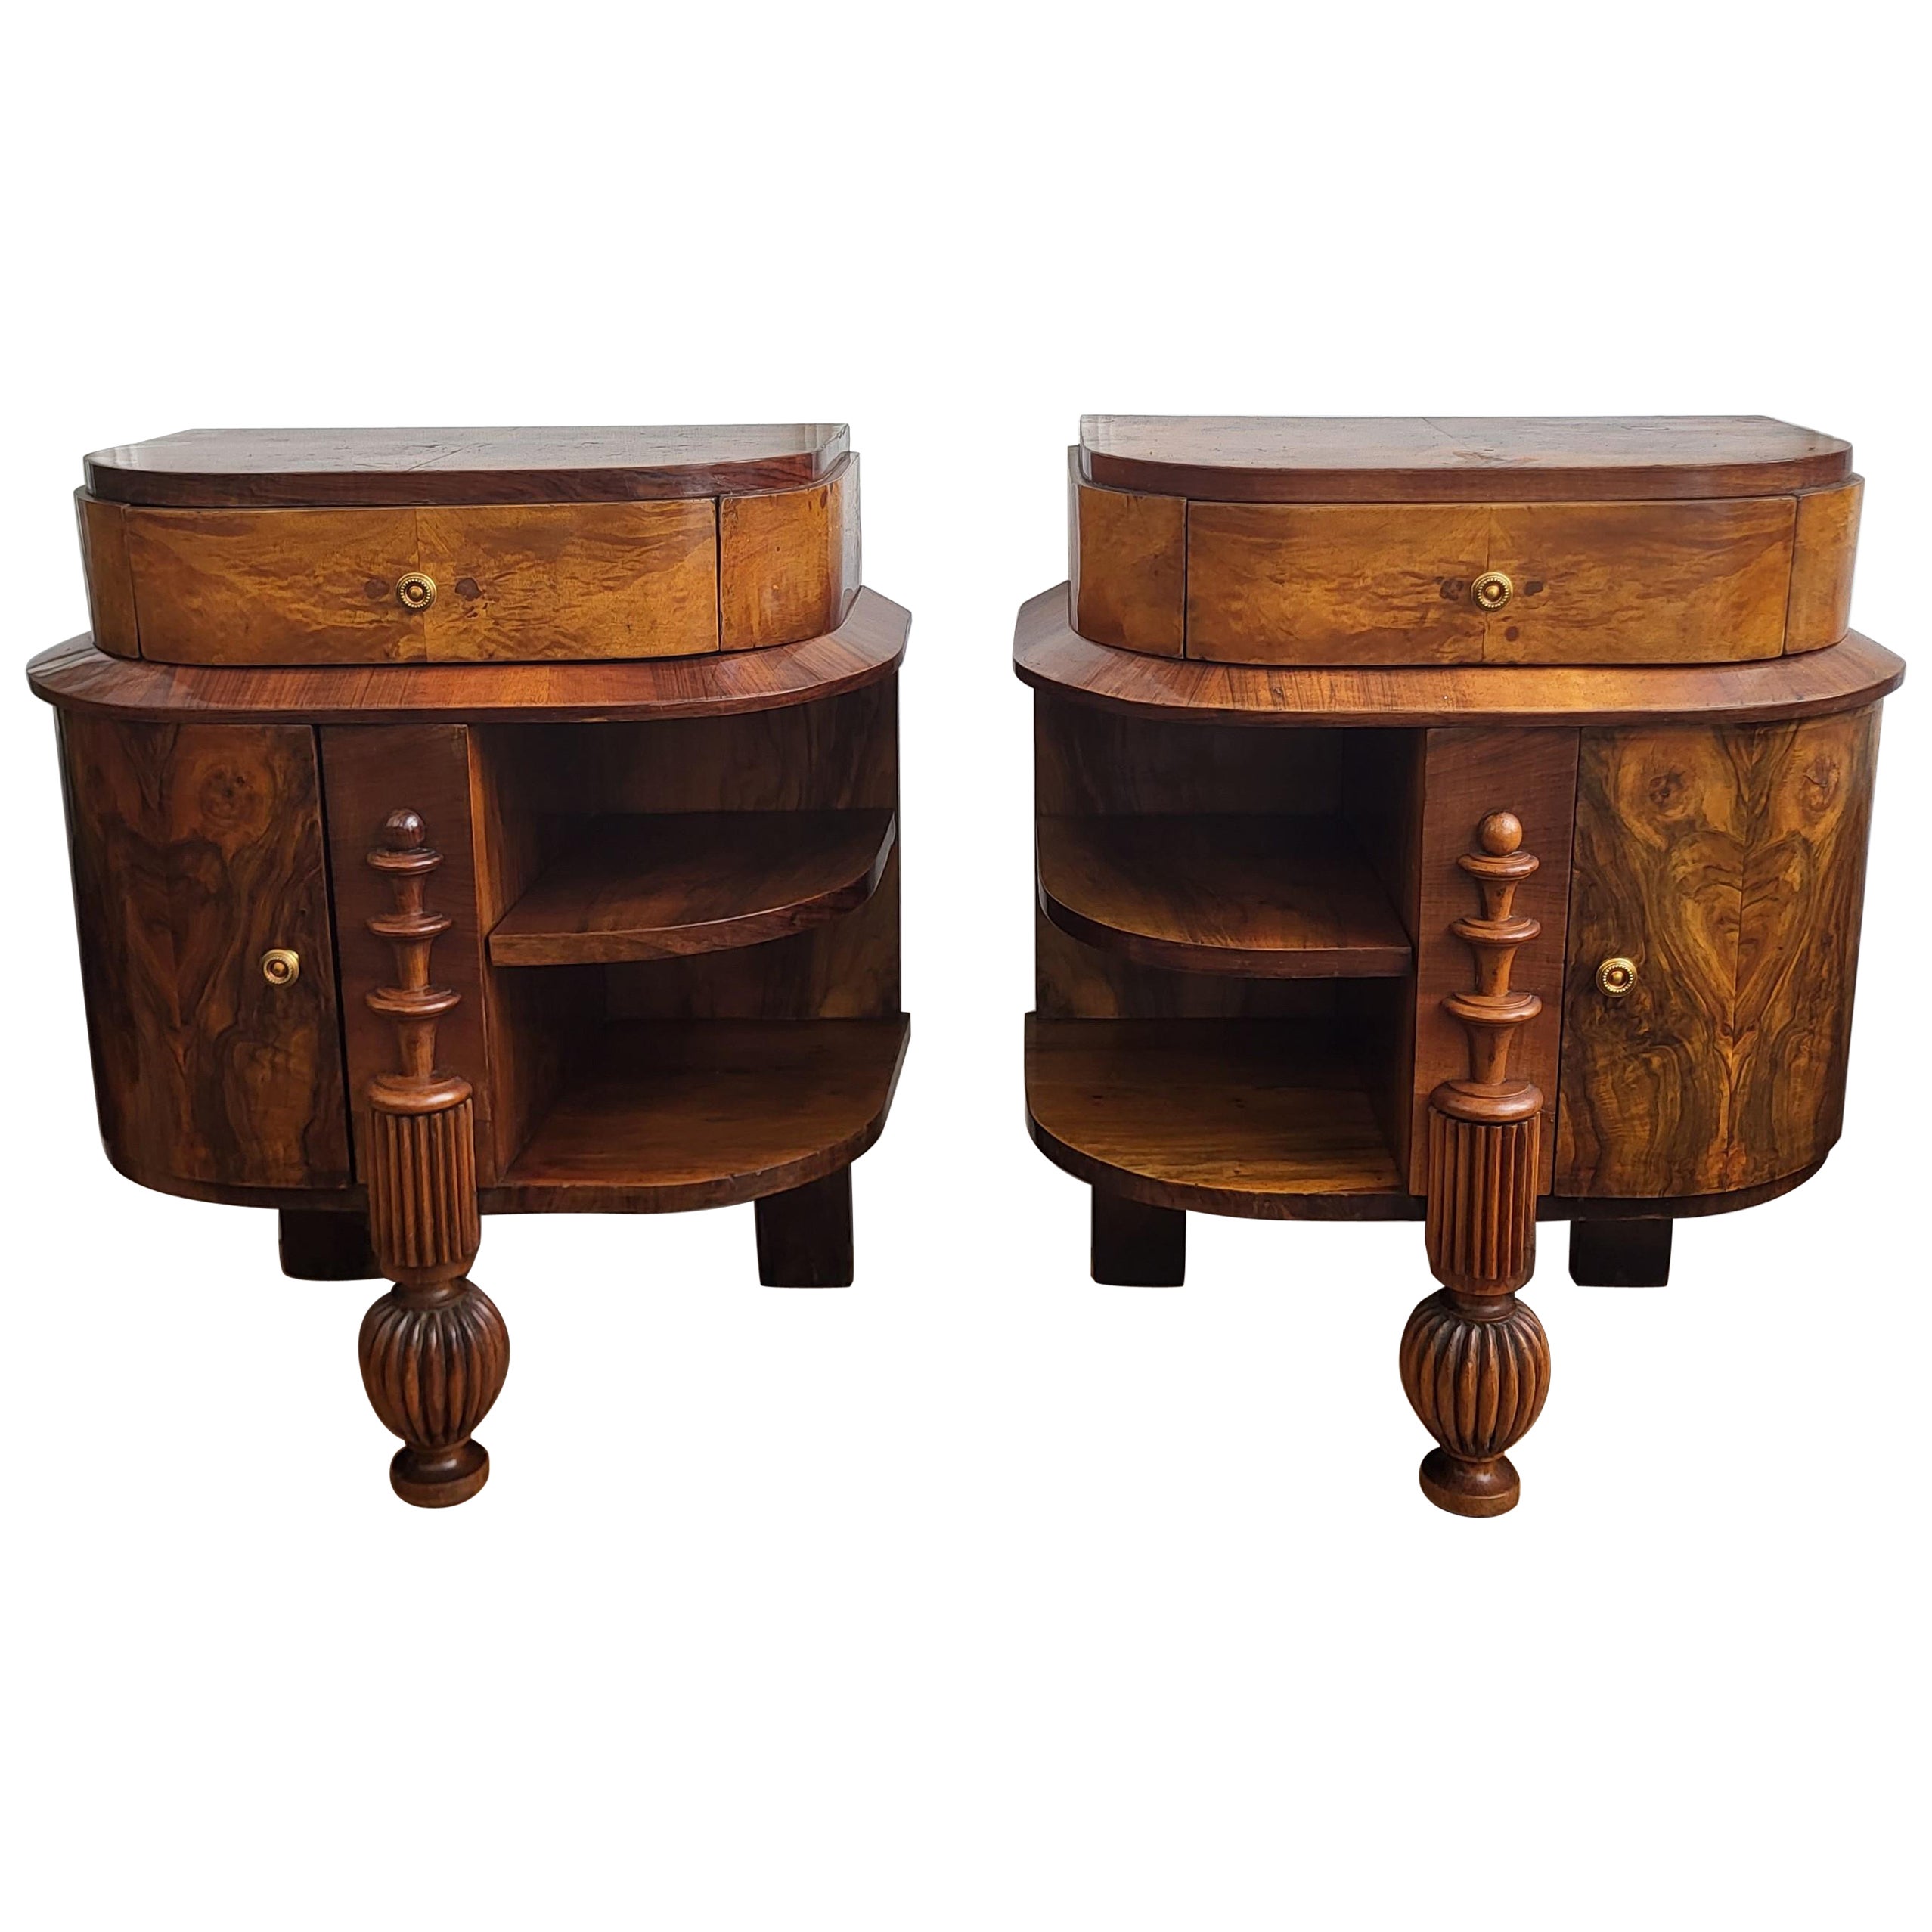 Pair of Italian Art Deco Night Stands Bed Side Tables in Burl Walnut